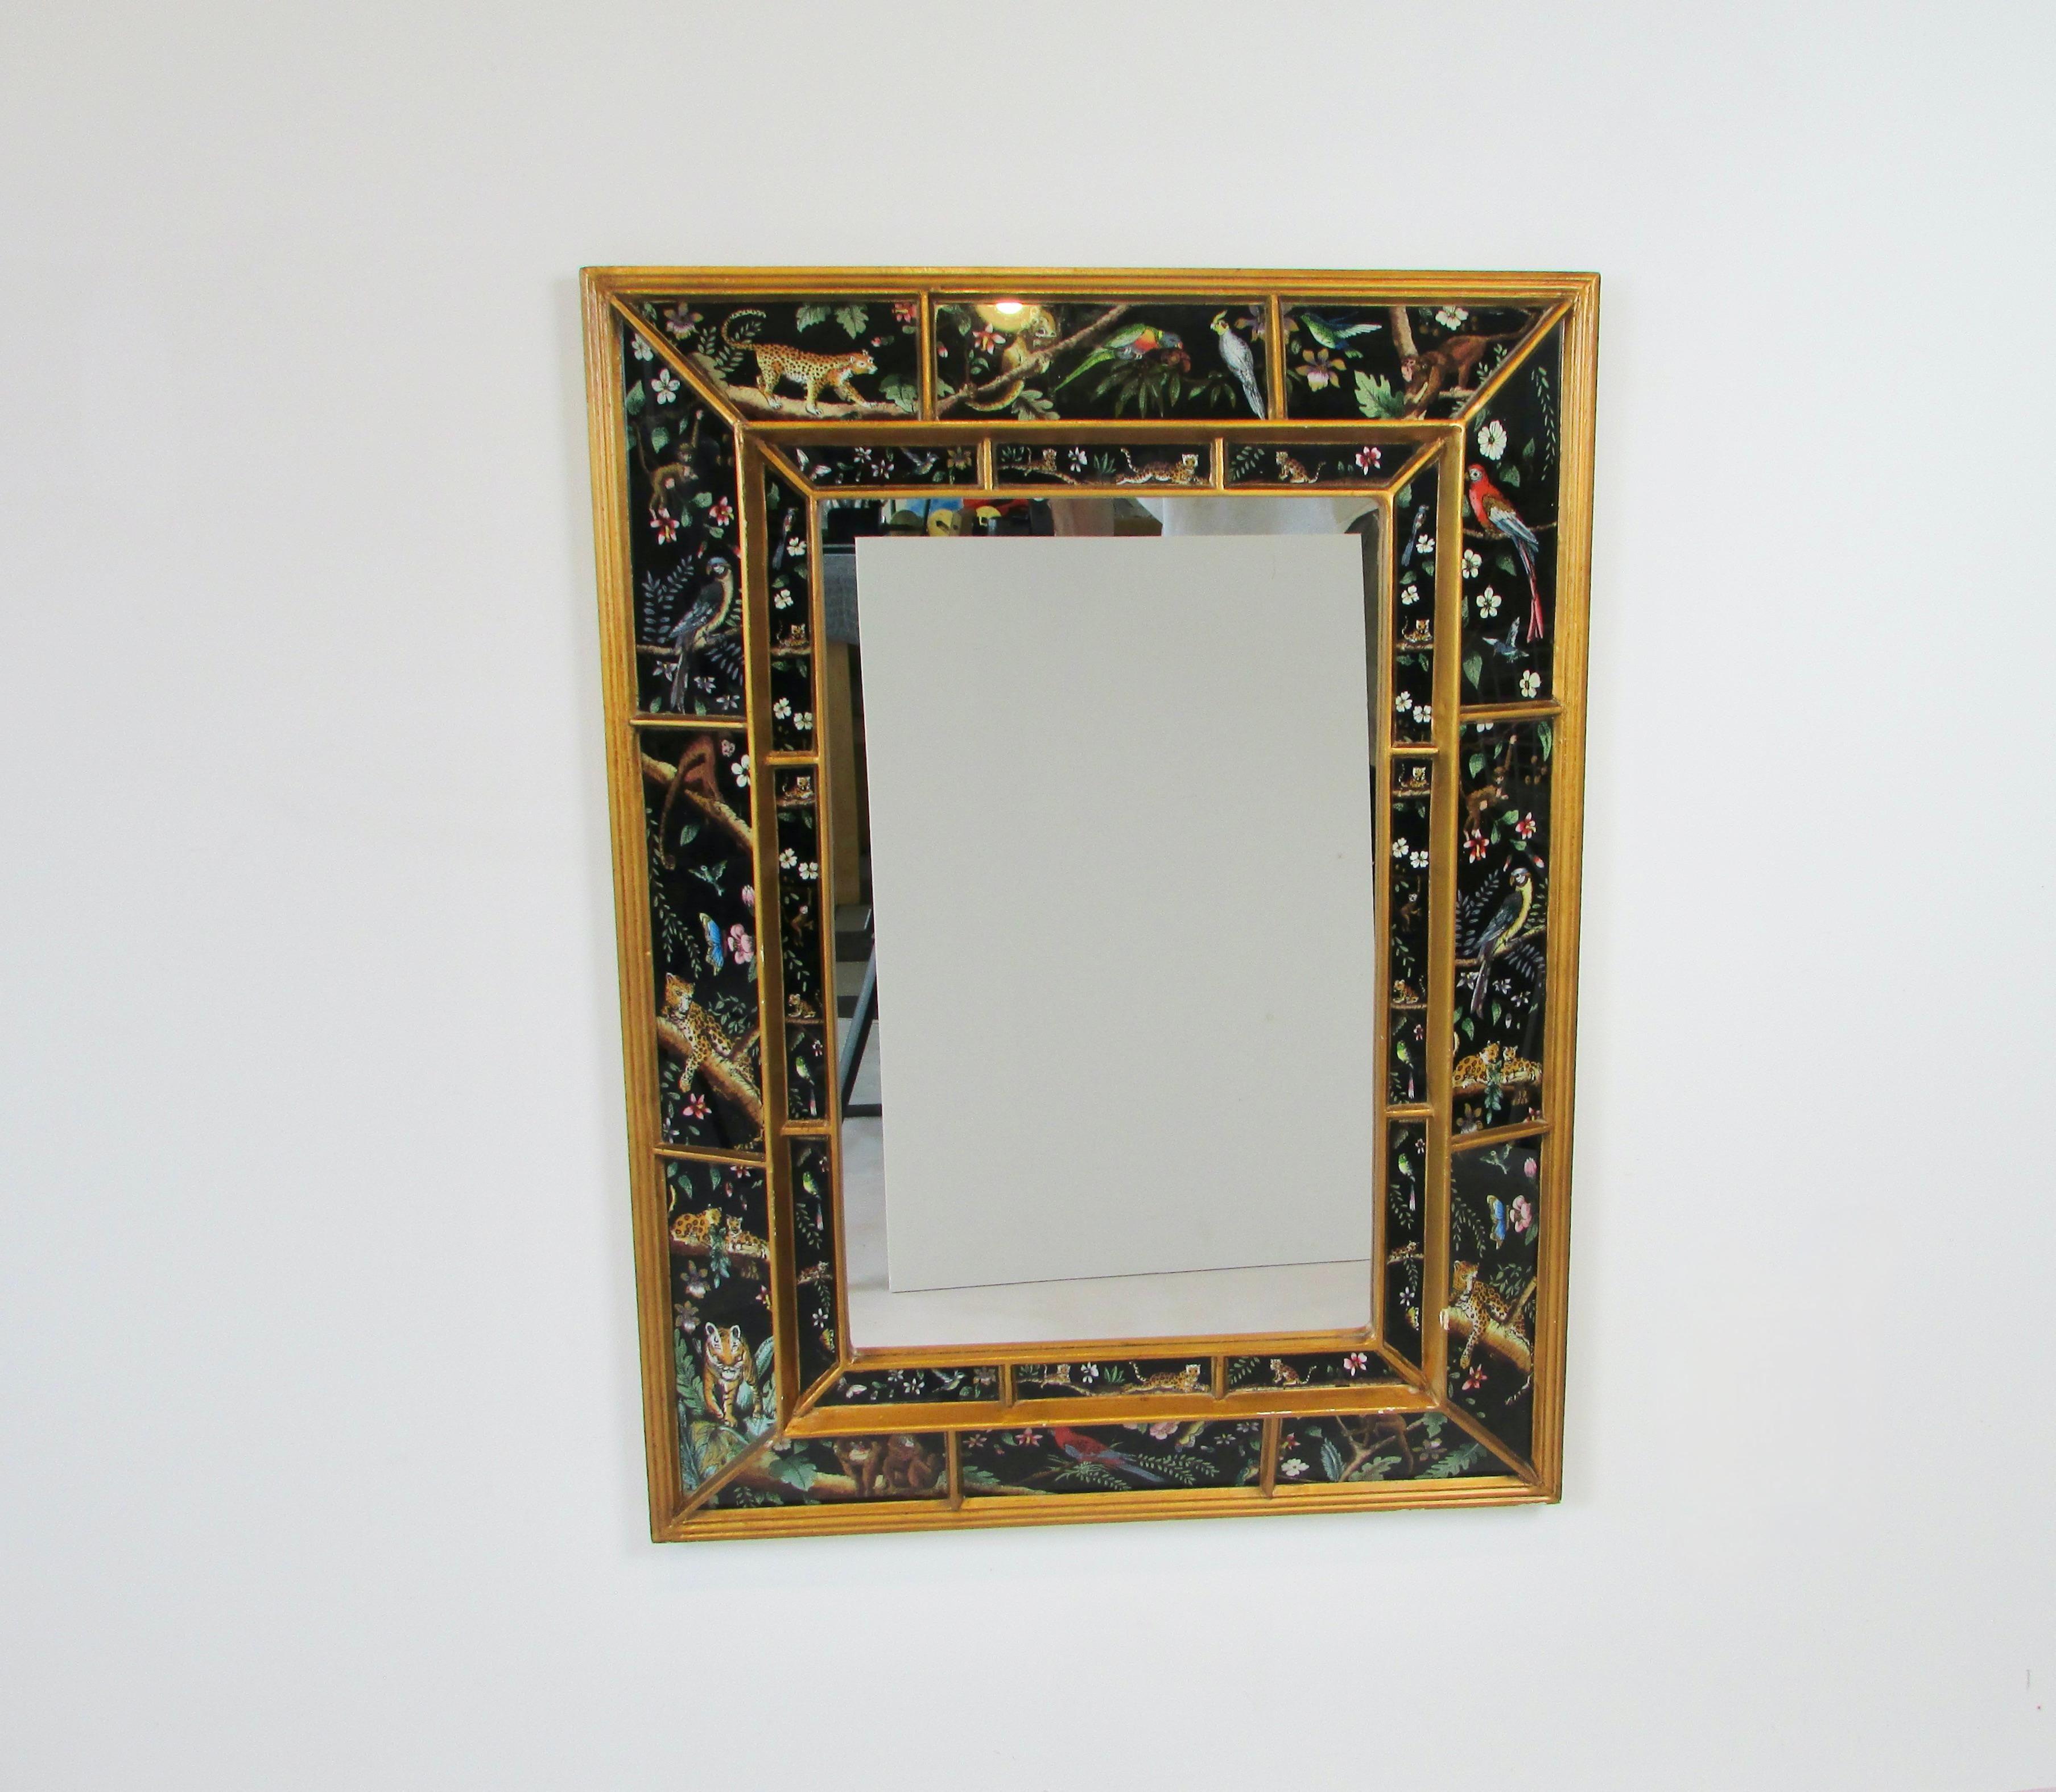 Wall mirror framed with vividly depicted exotic jungle animals as at the frame. Tigers panthers monkeys parrots etc. Allbordered in gold leaf.